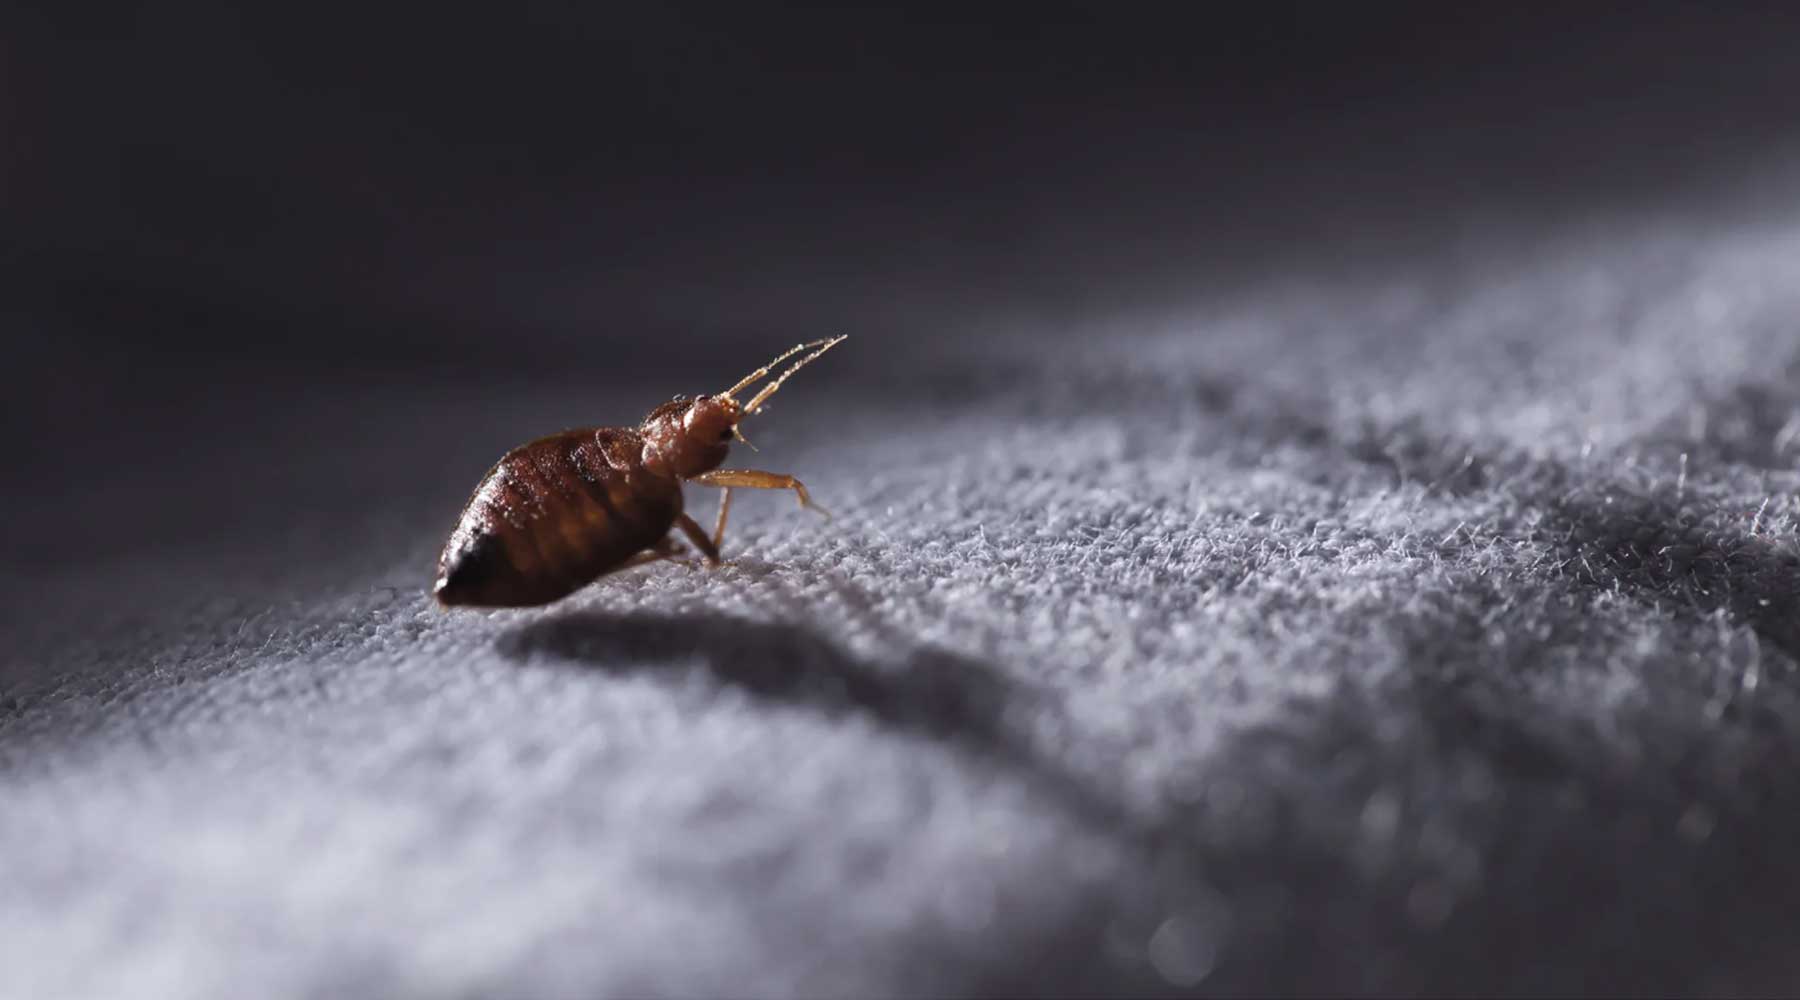 Neem oil's effectiveness against Bed Bugs